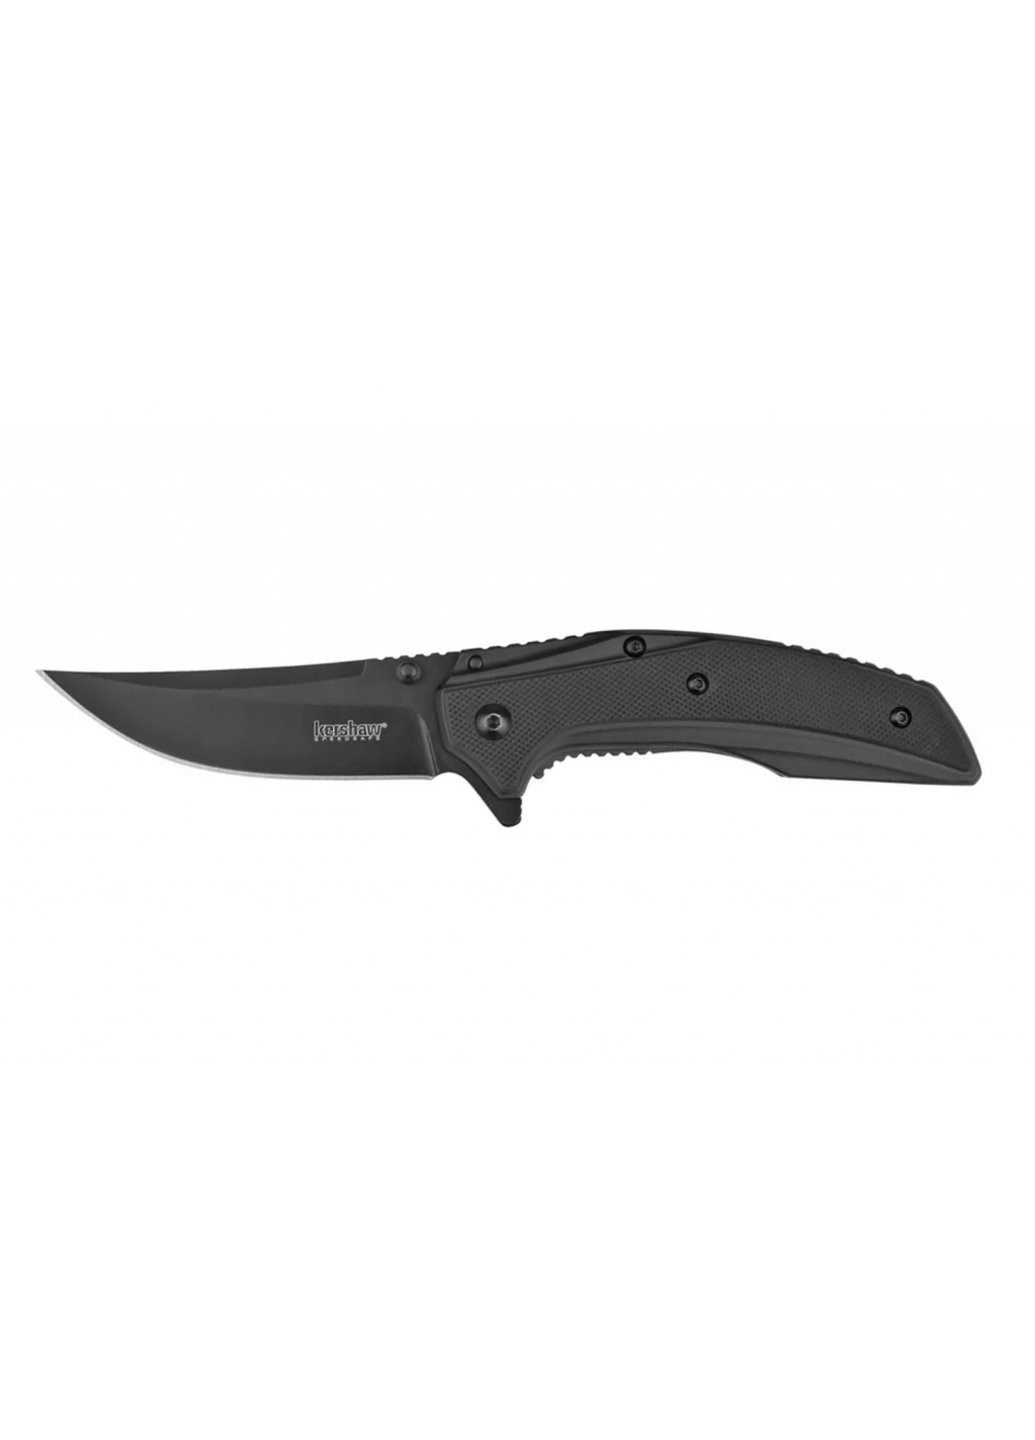 Нож Outright Black (8320BLK) Kershaw (257257402)